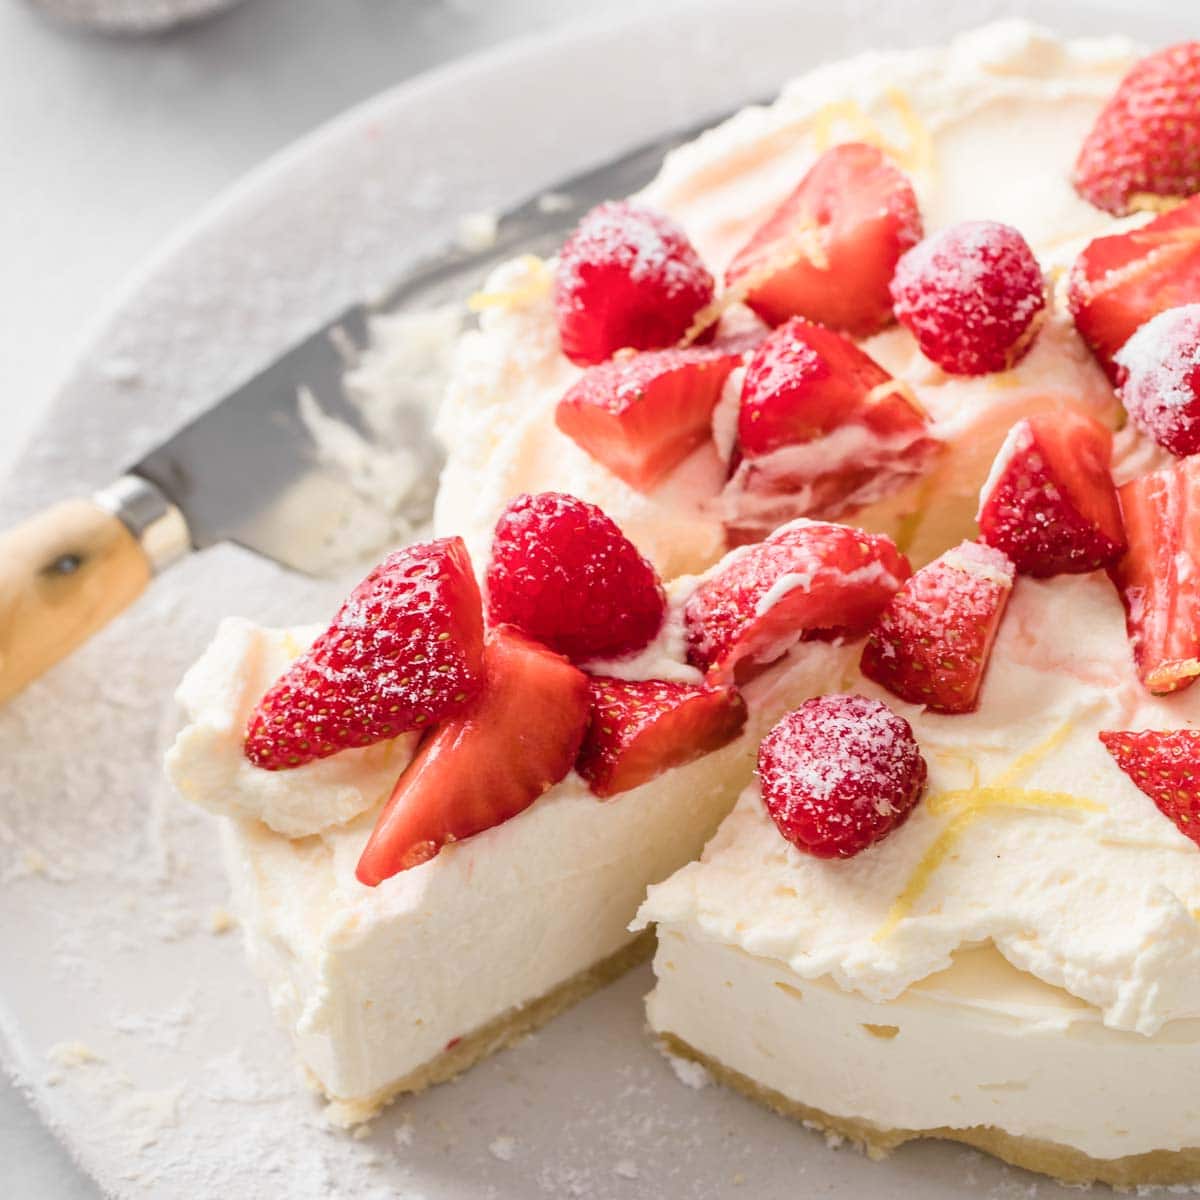 a no bake sugar free cheesecale topped with whipped cream, raspberries and strawberries